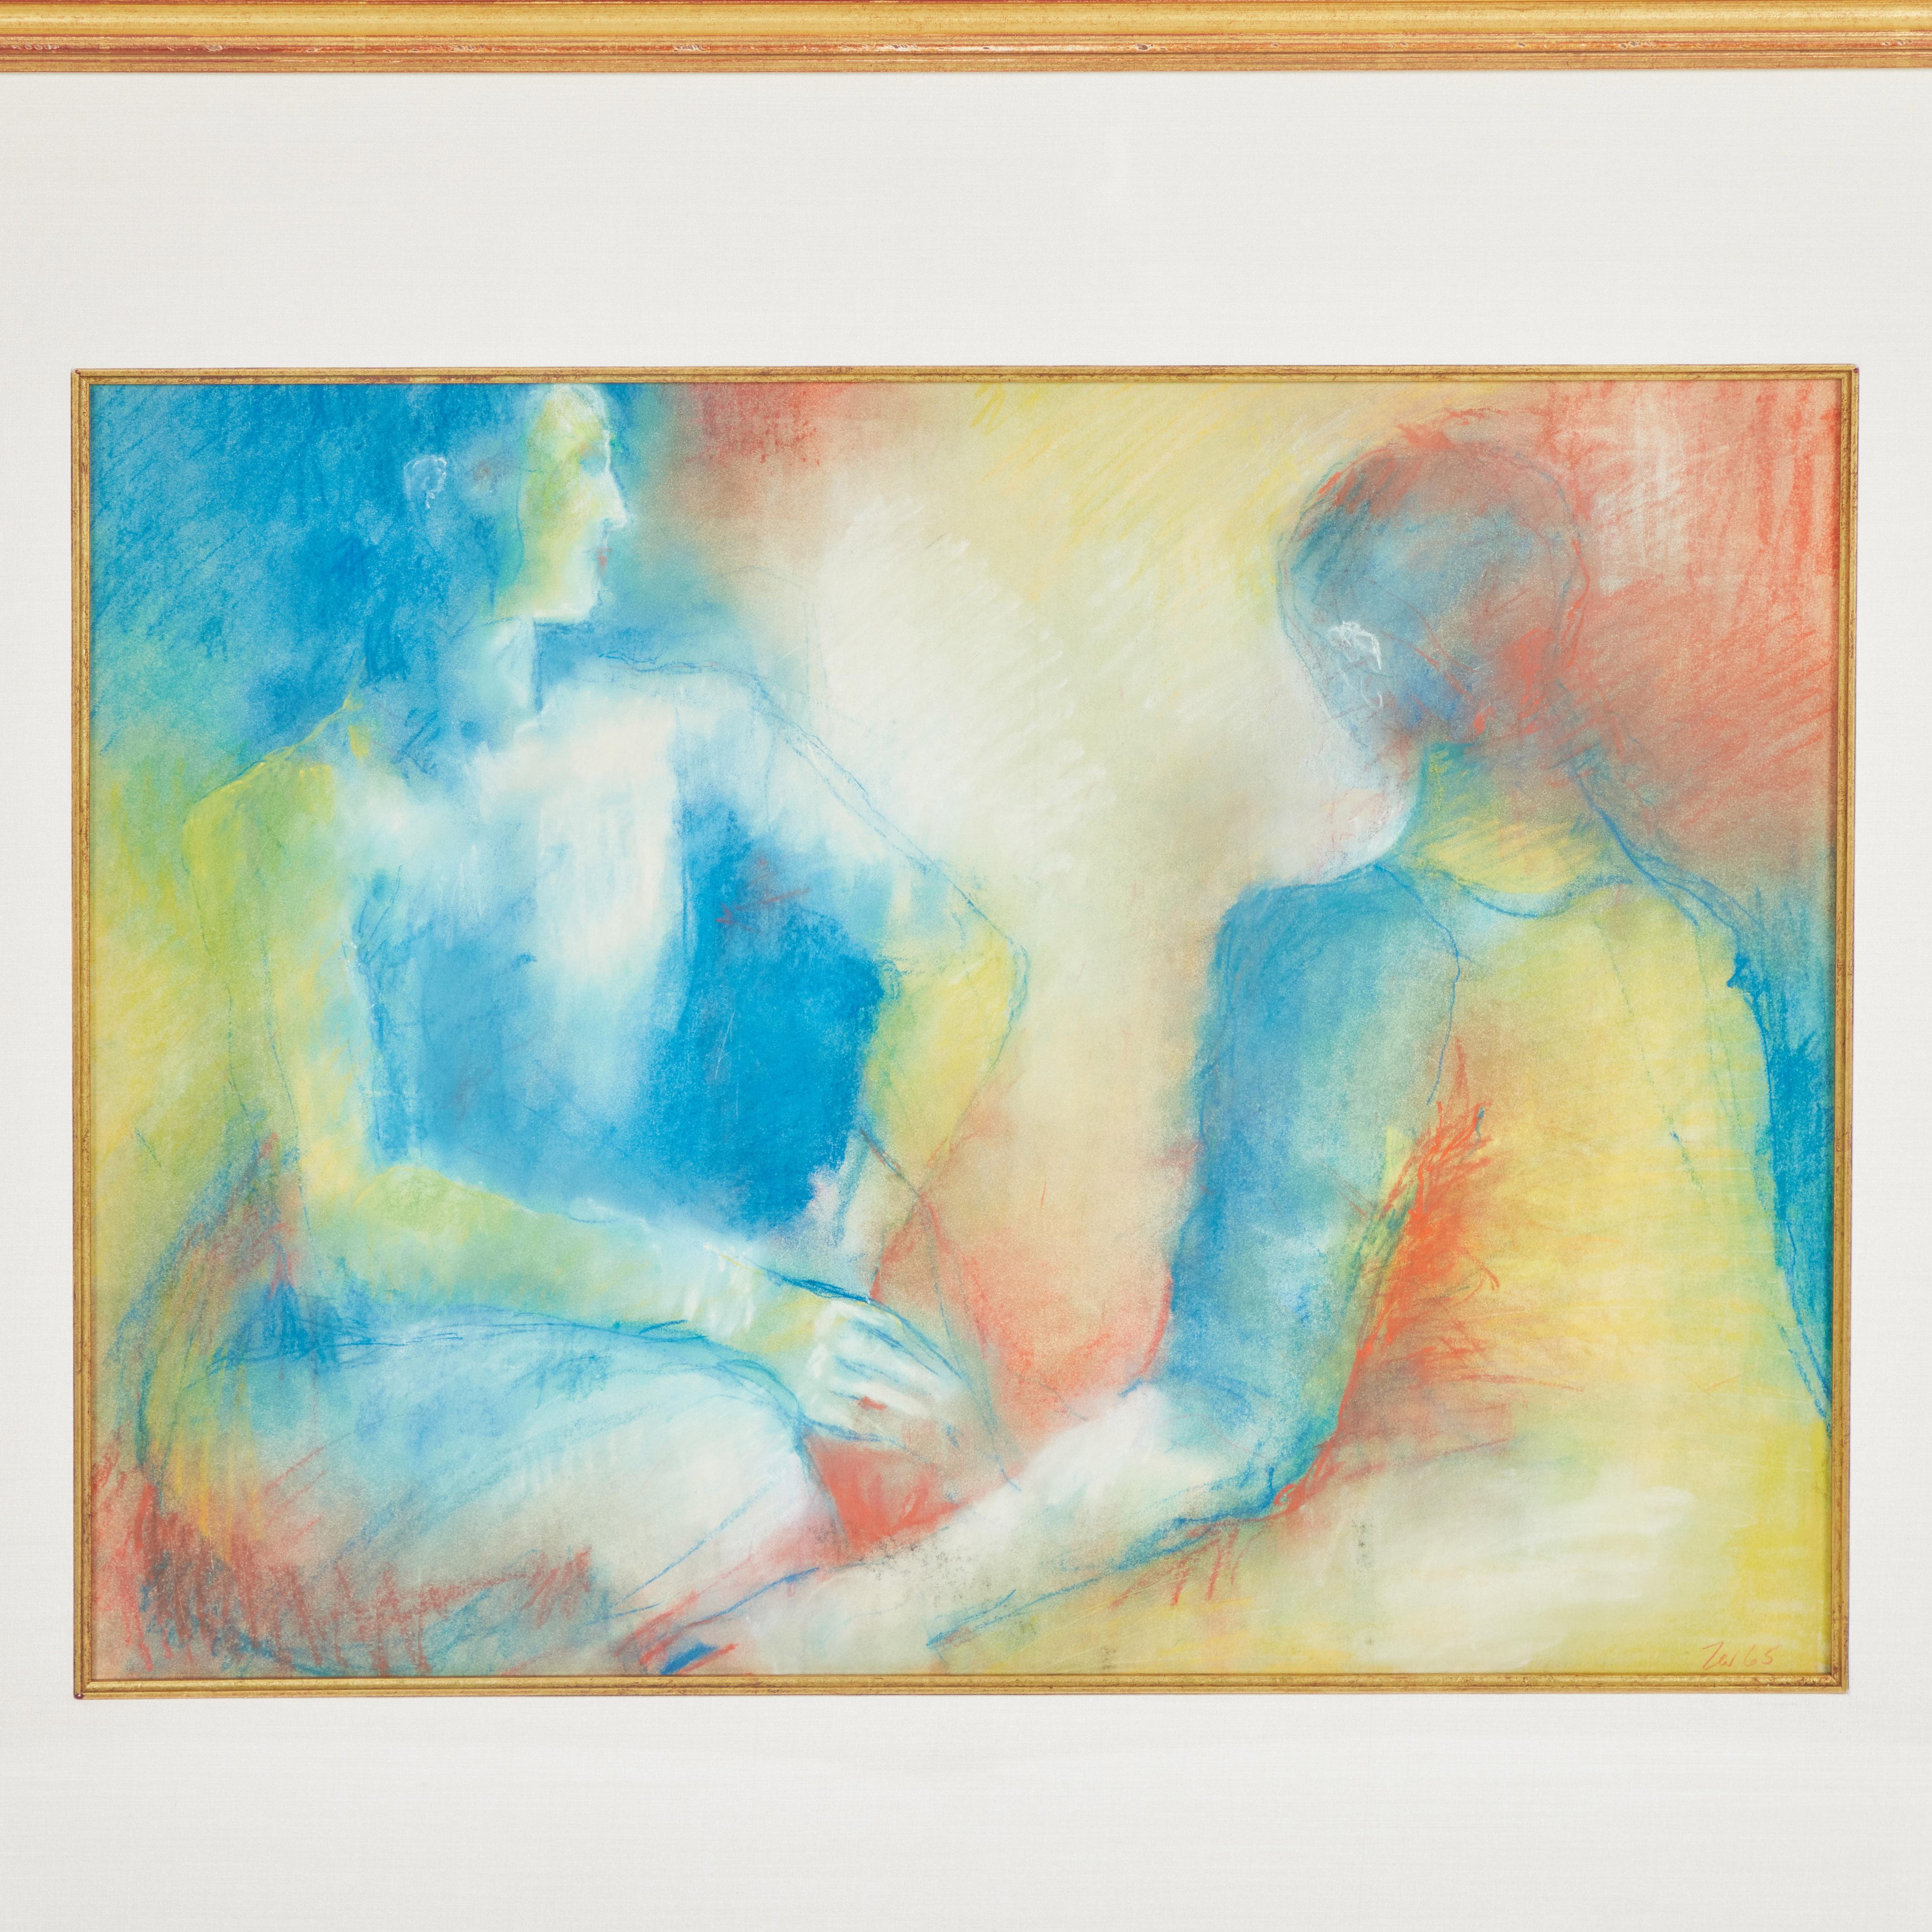 Colorful but contemplative, this serene original vintage pastel of 2 figures is lovely. It is signed by the artist and is dated 1965. A beautiful accompaniment to any room and adds a subtle touch of color.

It has been newly framed and measures 32